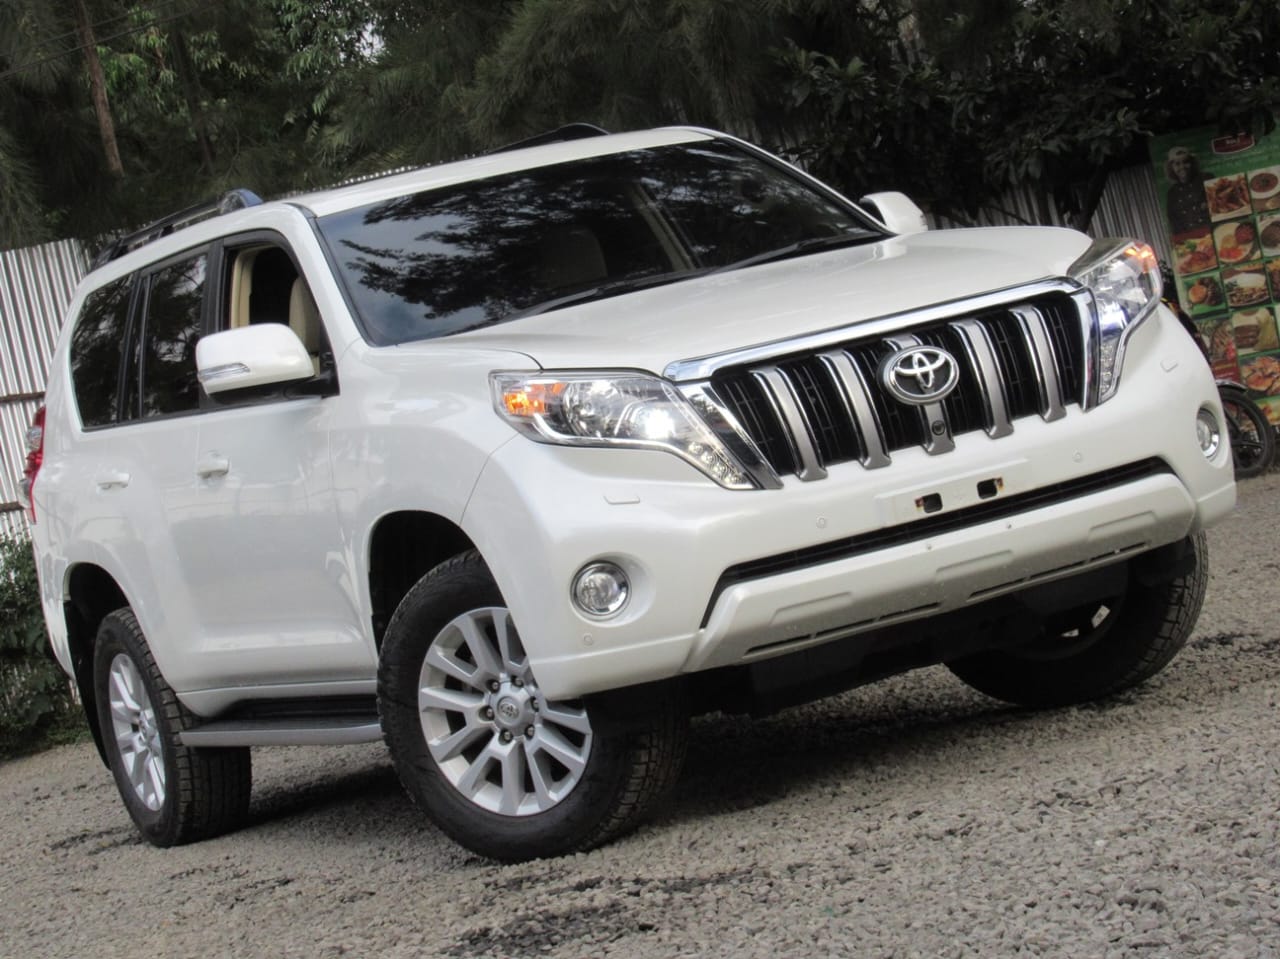 Cars For Sale/Vehicles-Toyota PRADO TZ-G QUICKEST SALE🔥 Trade in OK EXCLUSIVE 8